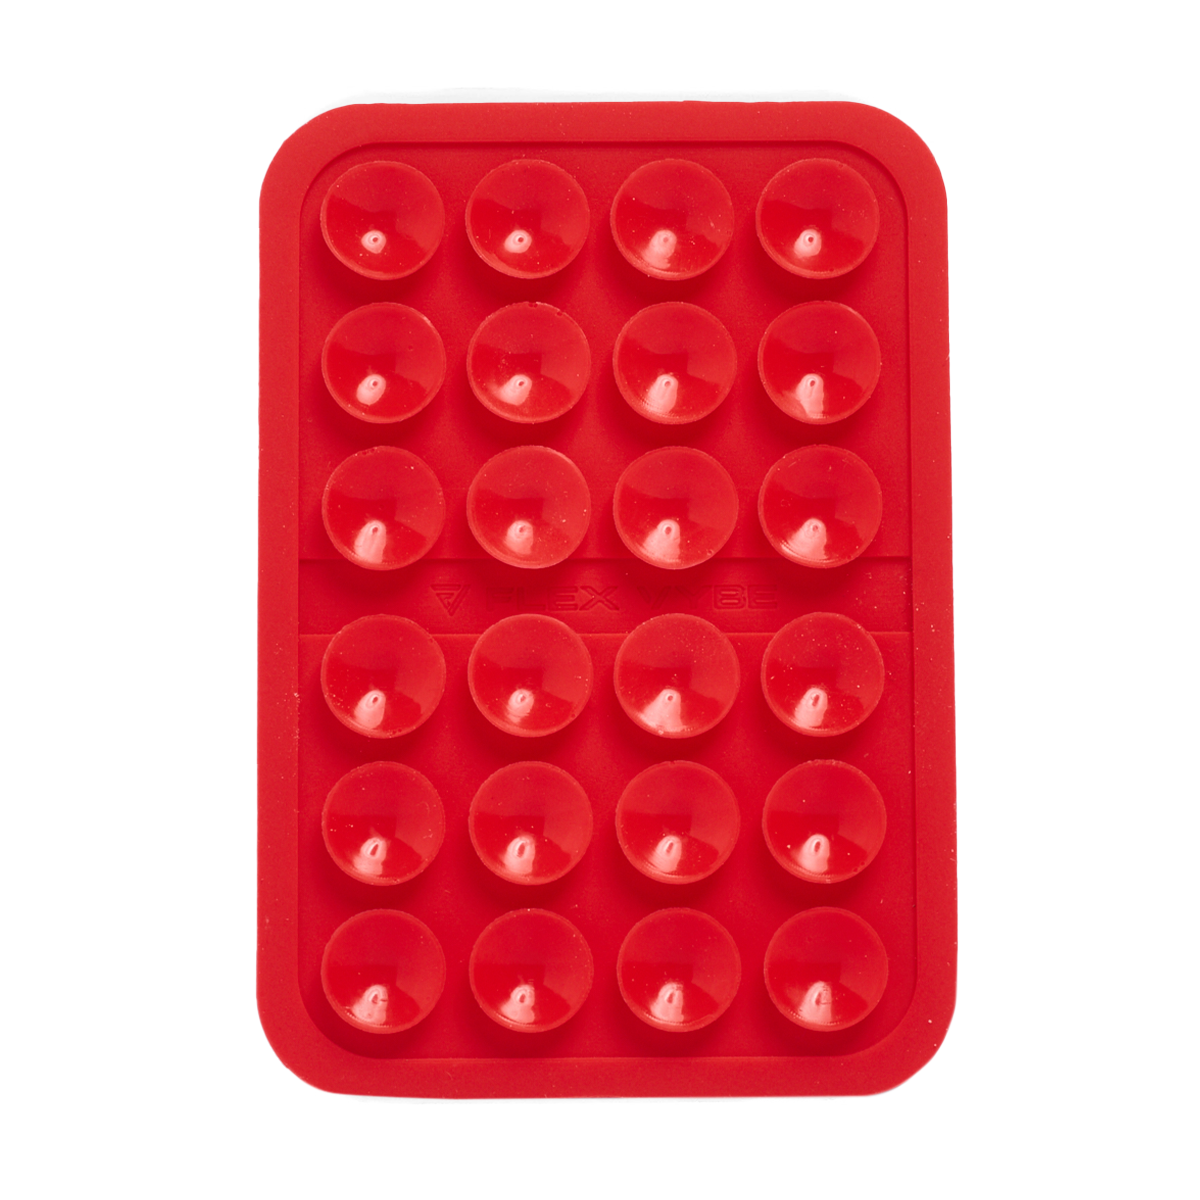 StickyVybe -  Silicone Suction Phone Adhesive Mount - Red